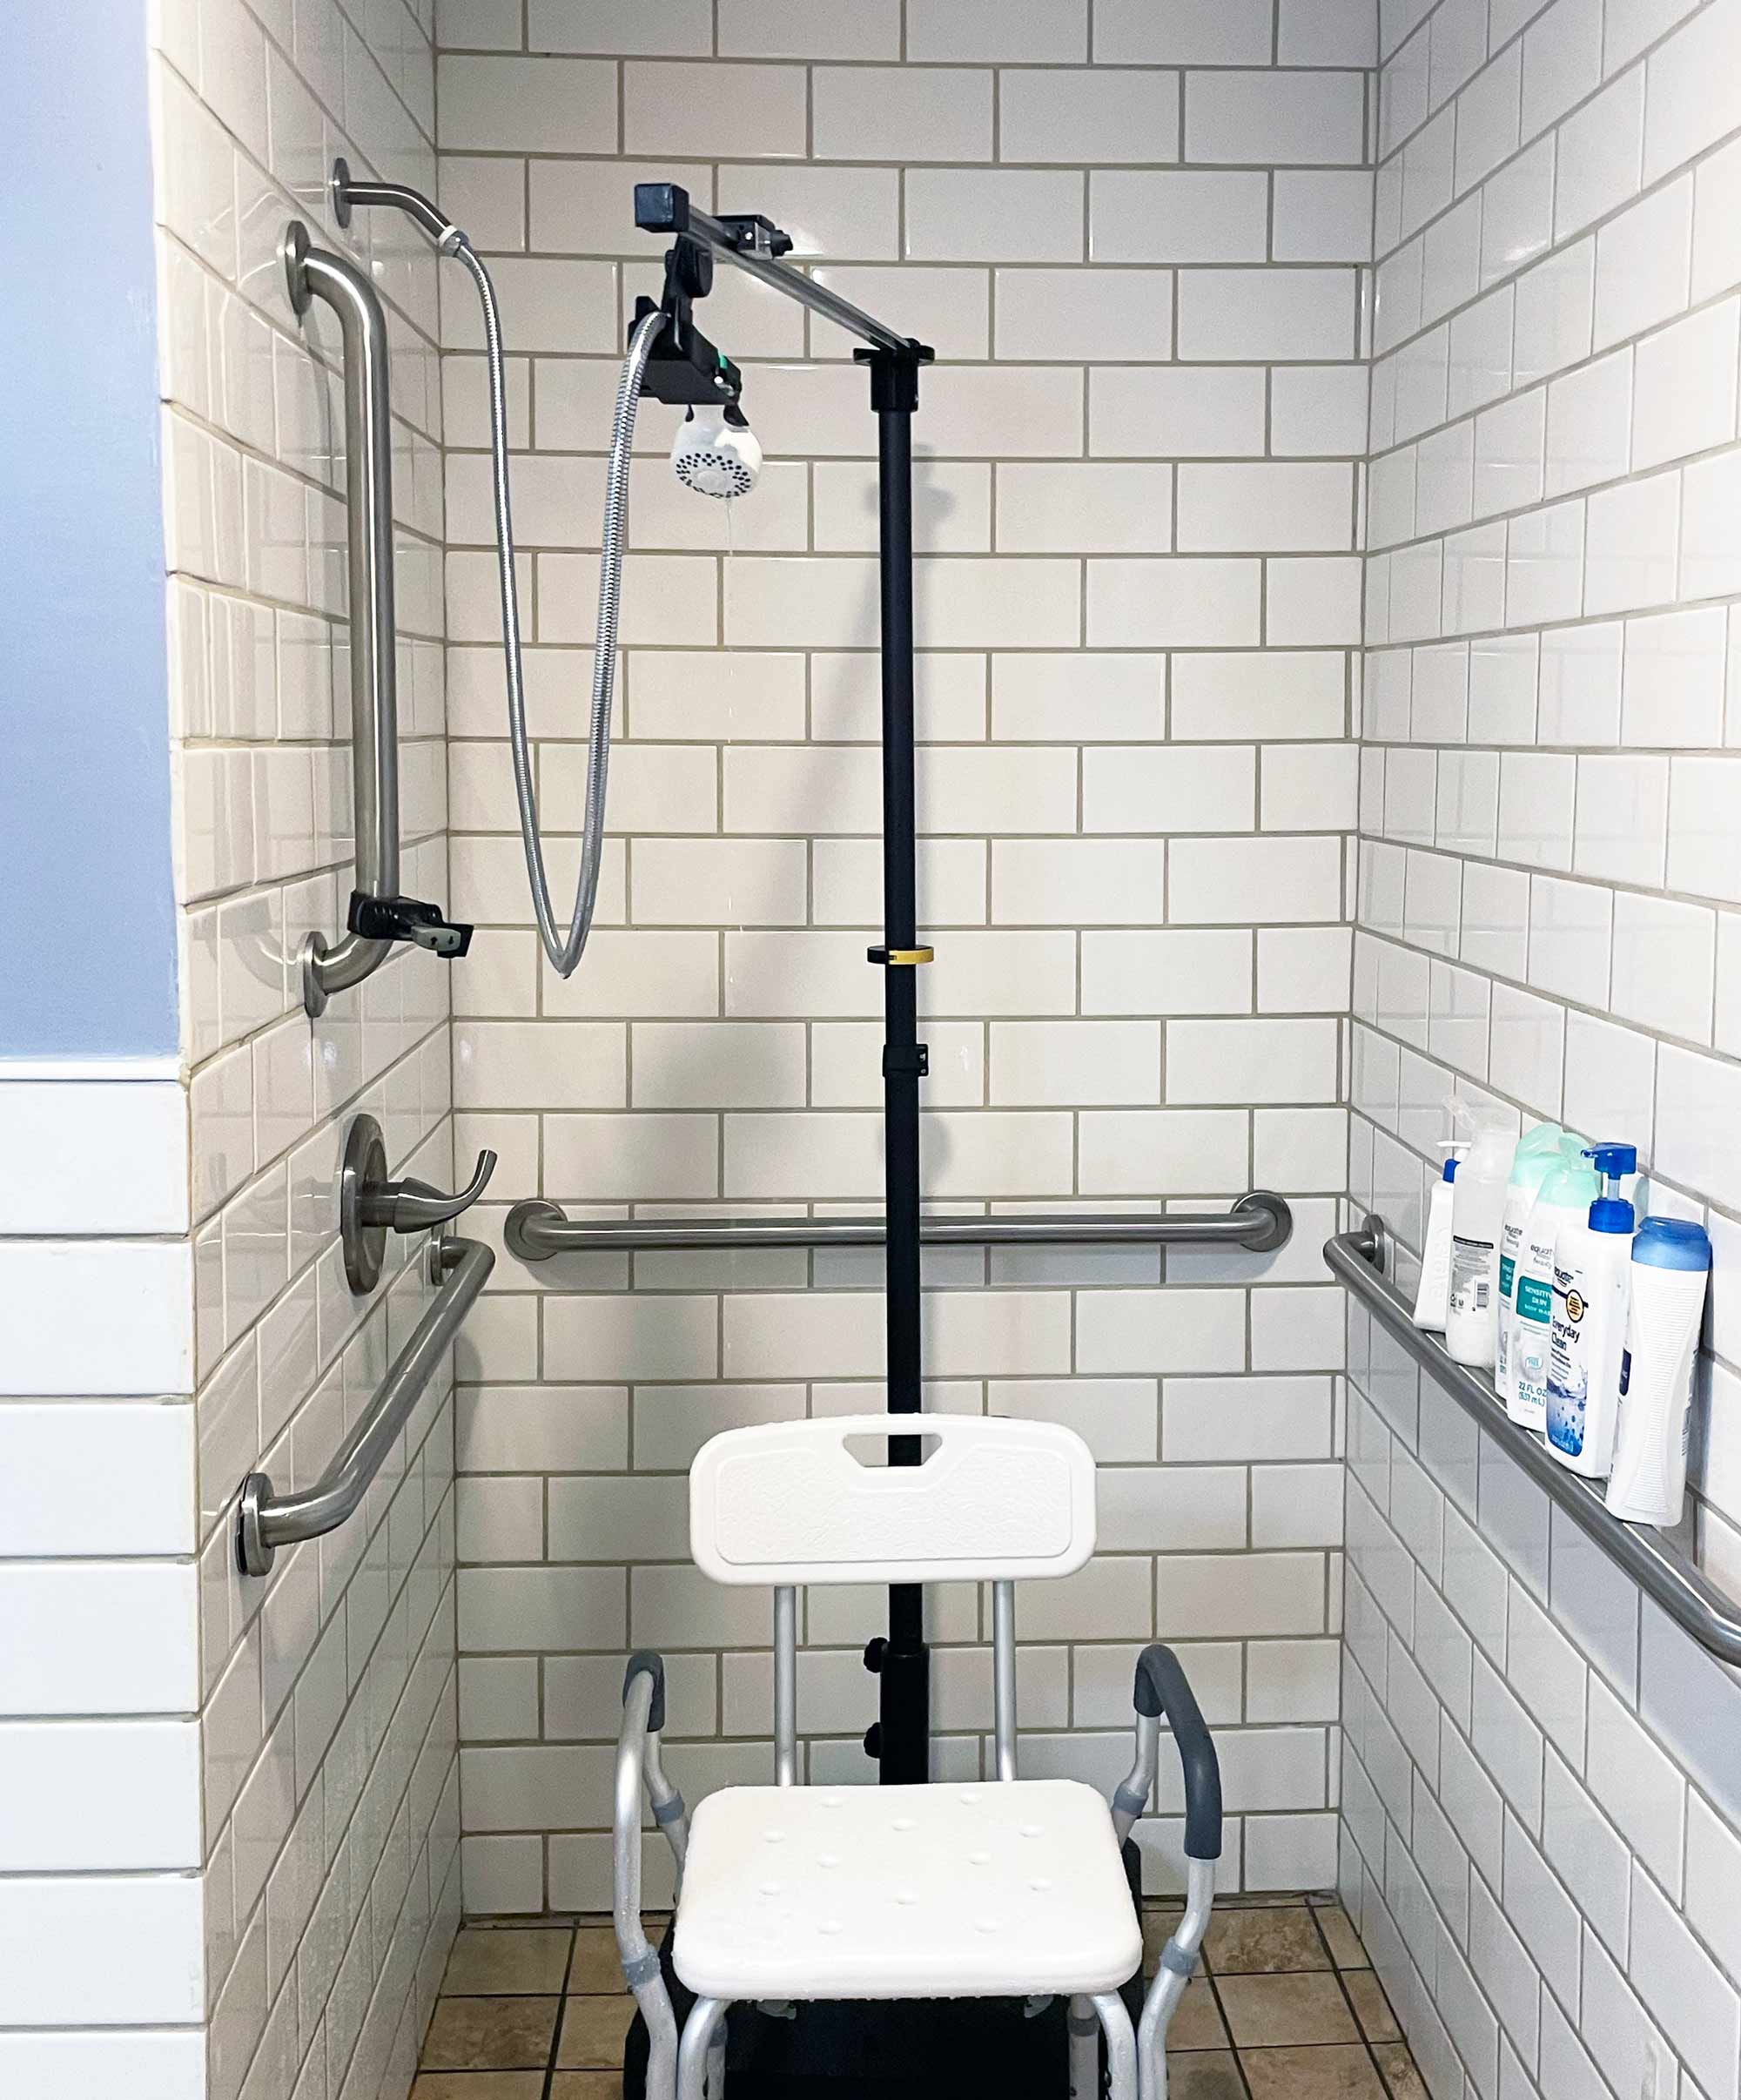 The Aide-ing Arm shower chair attachment